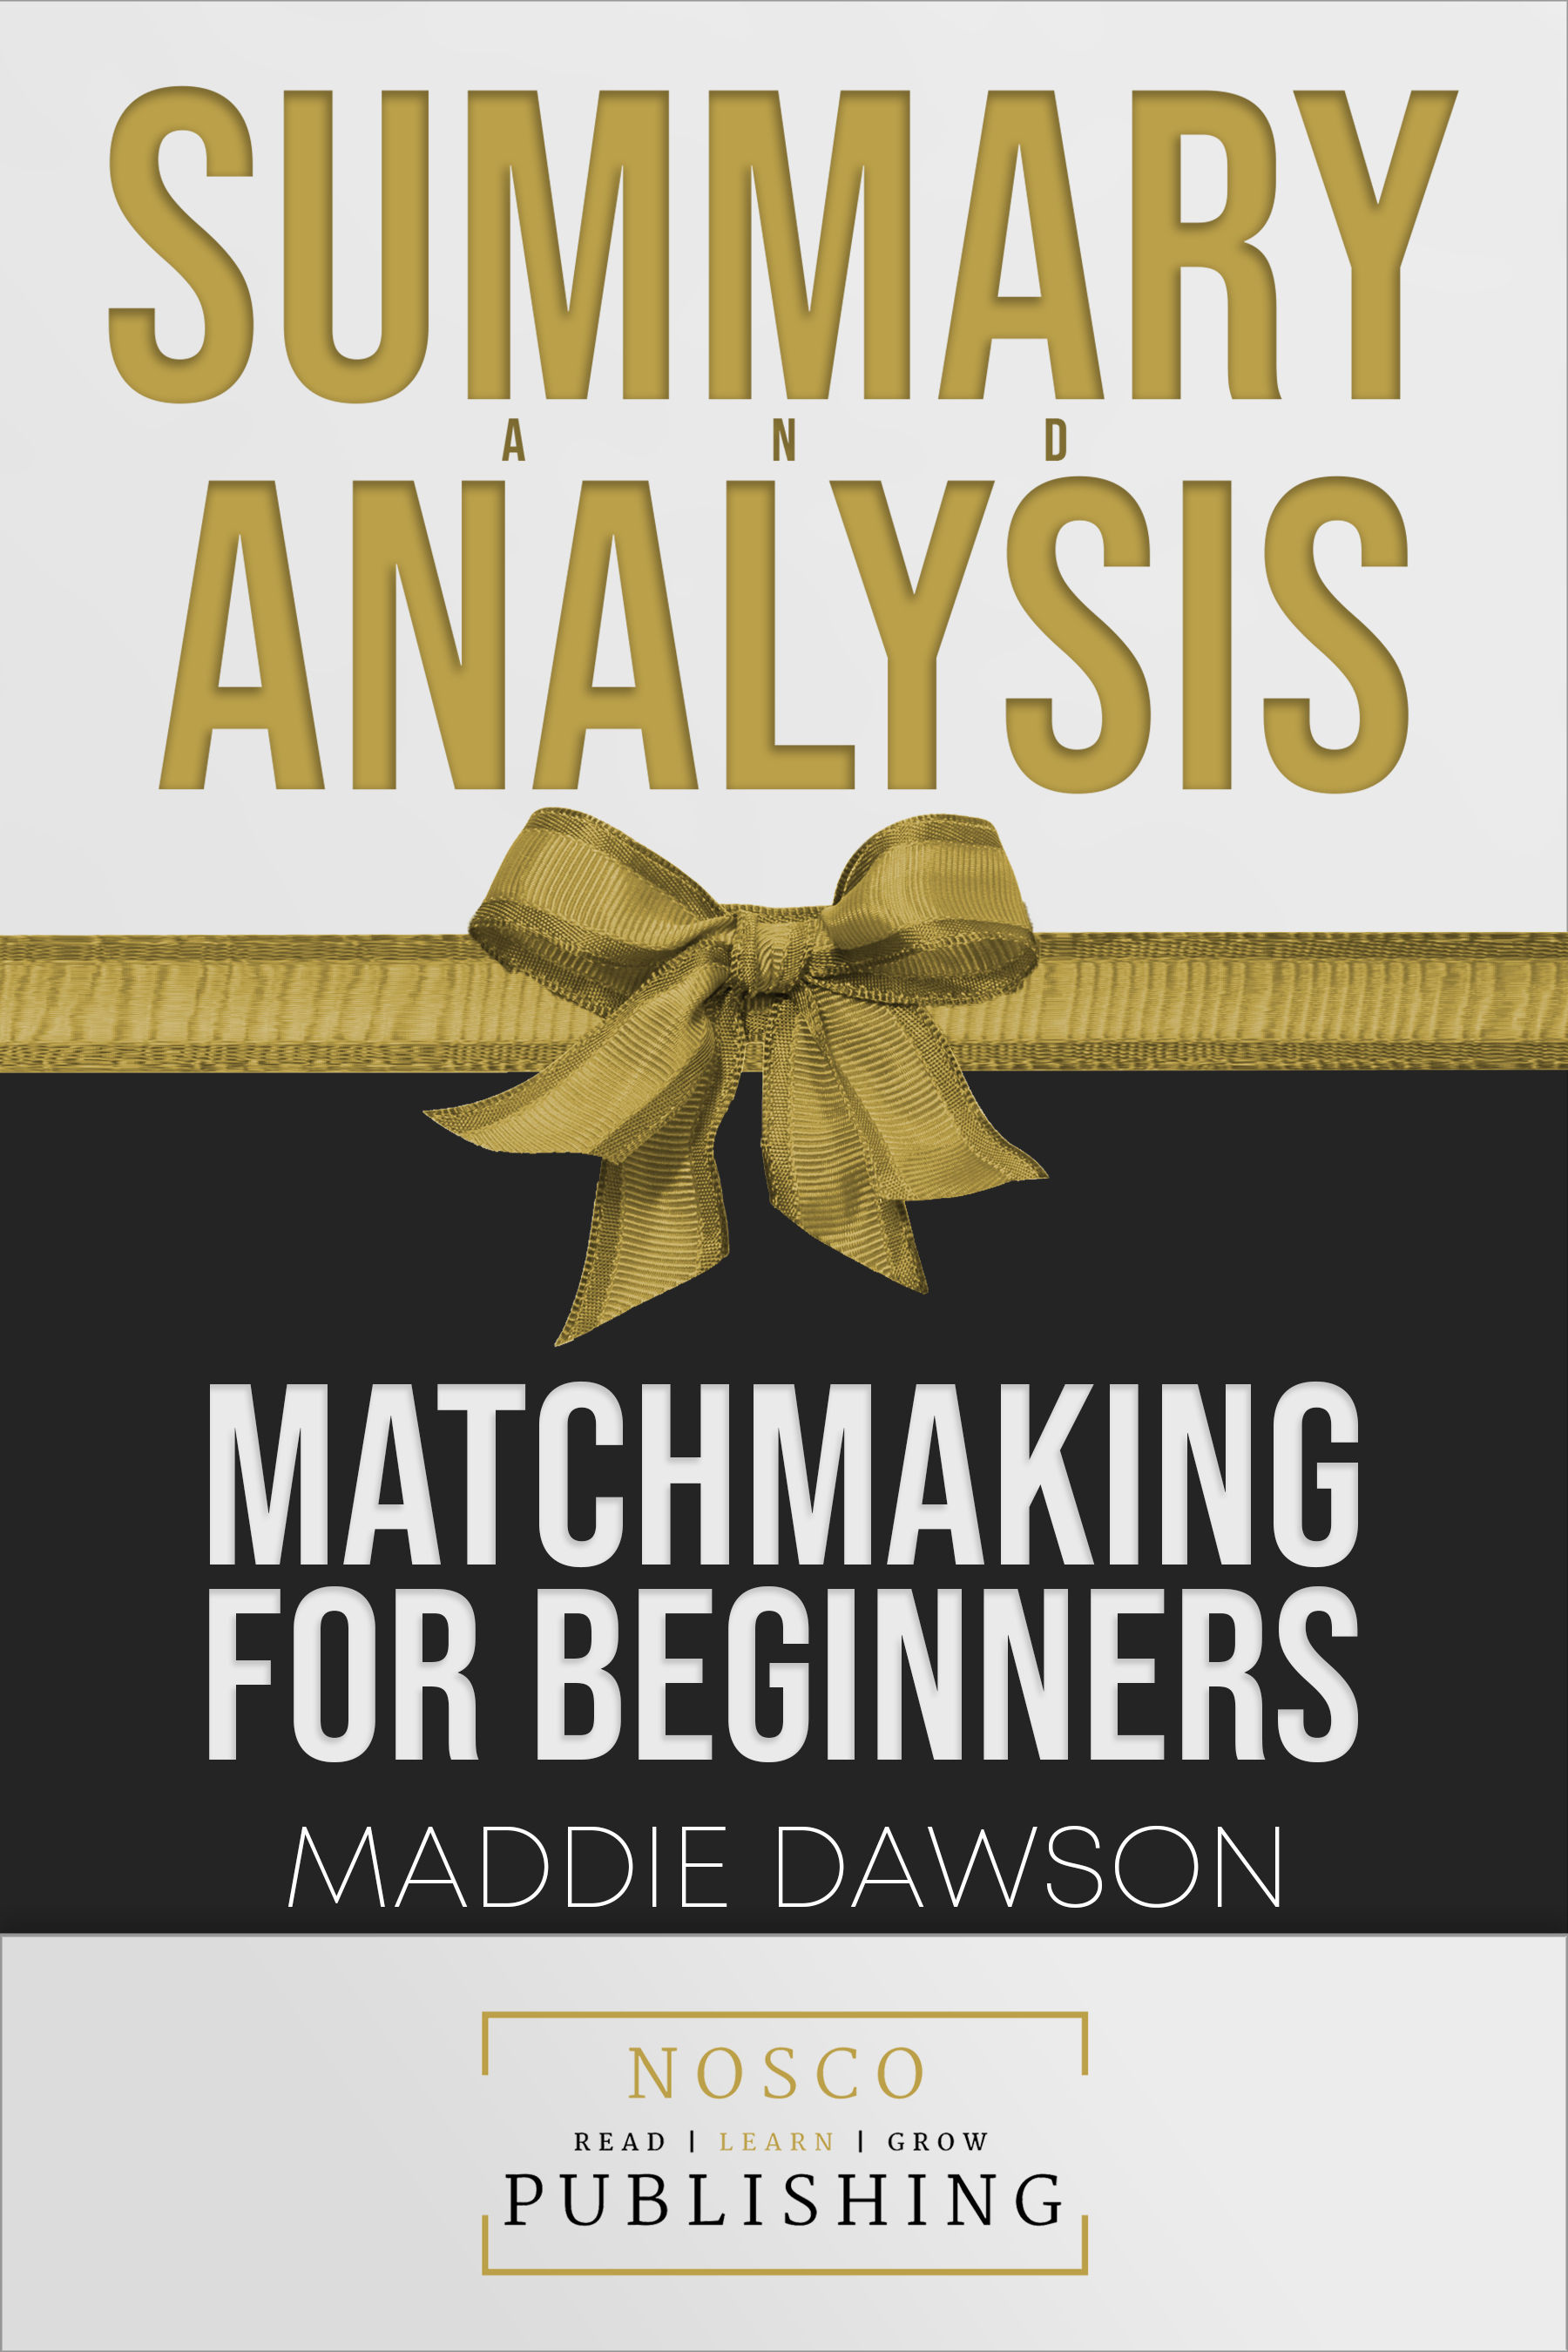 FREE: Summary of Matchmaking for Beginners by Maddie Dawson | Summary & Analysis by Nosco Publishing